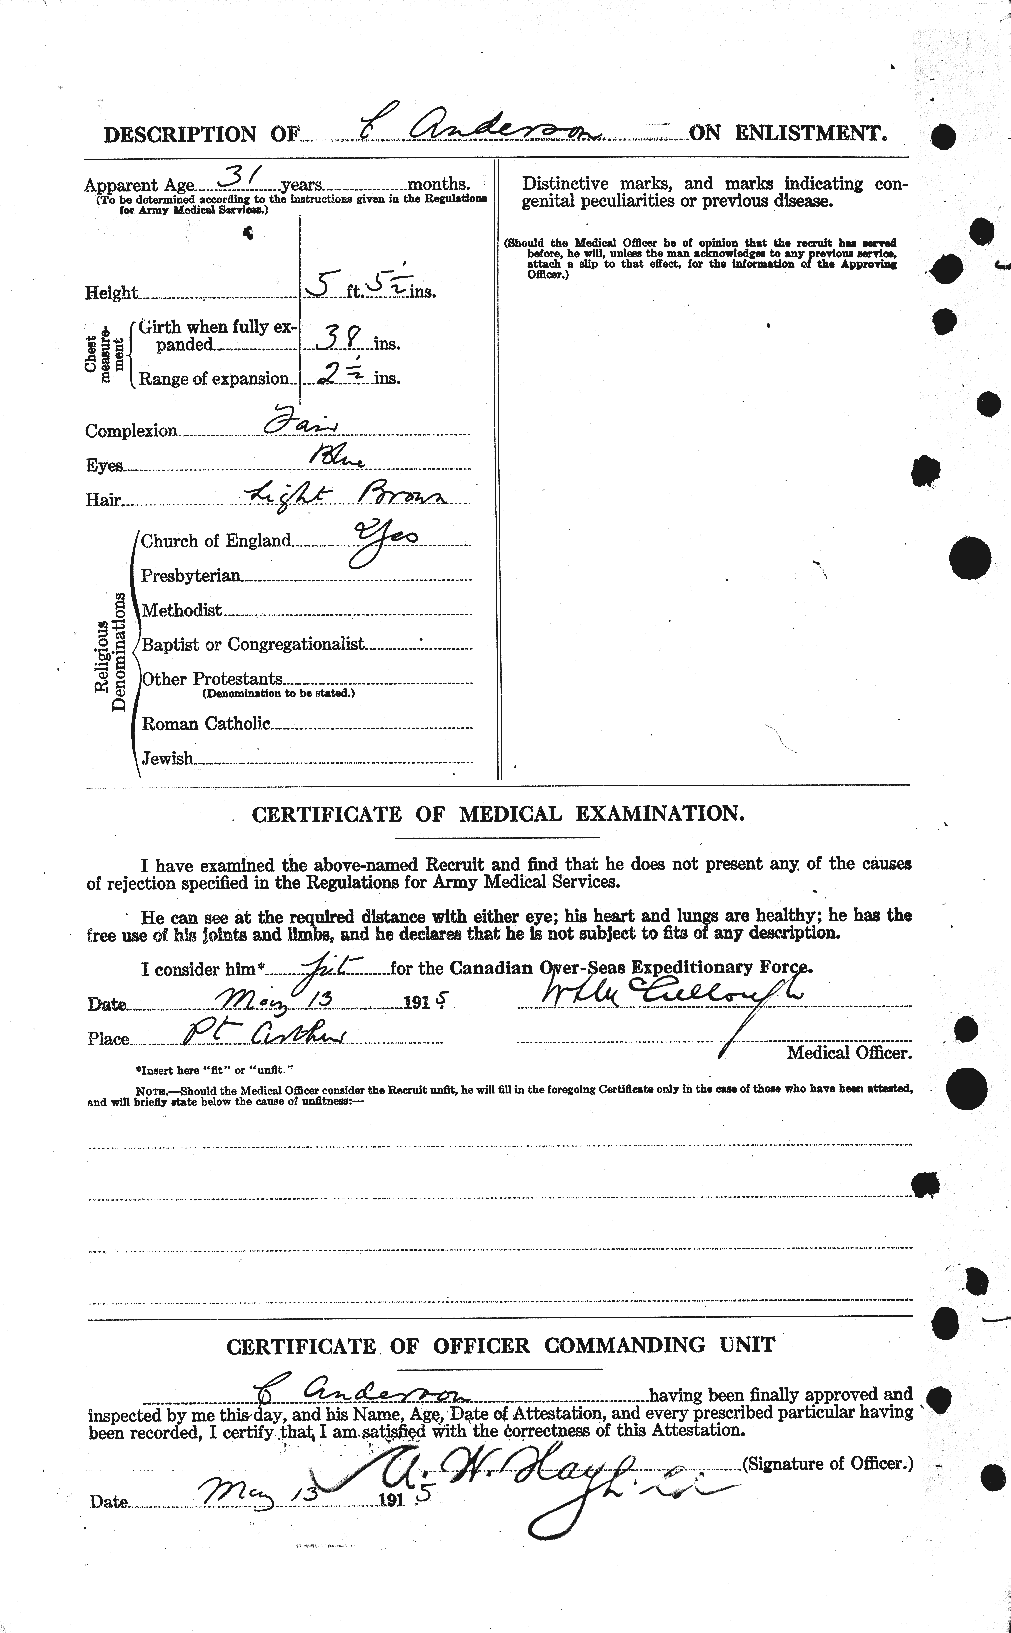 Personnel Records of the First World War - CEF 209268b